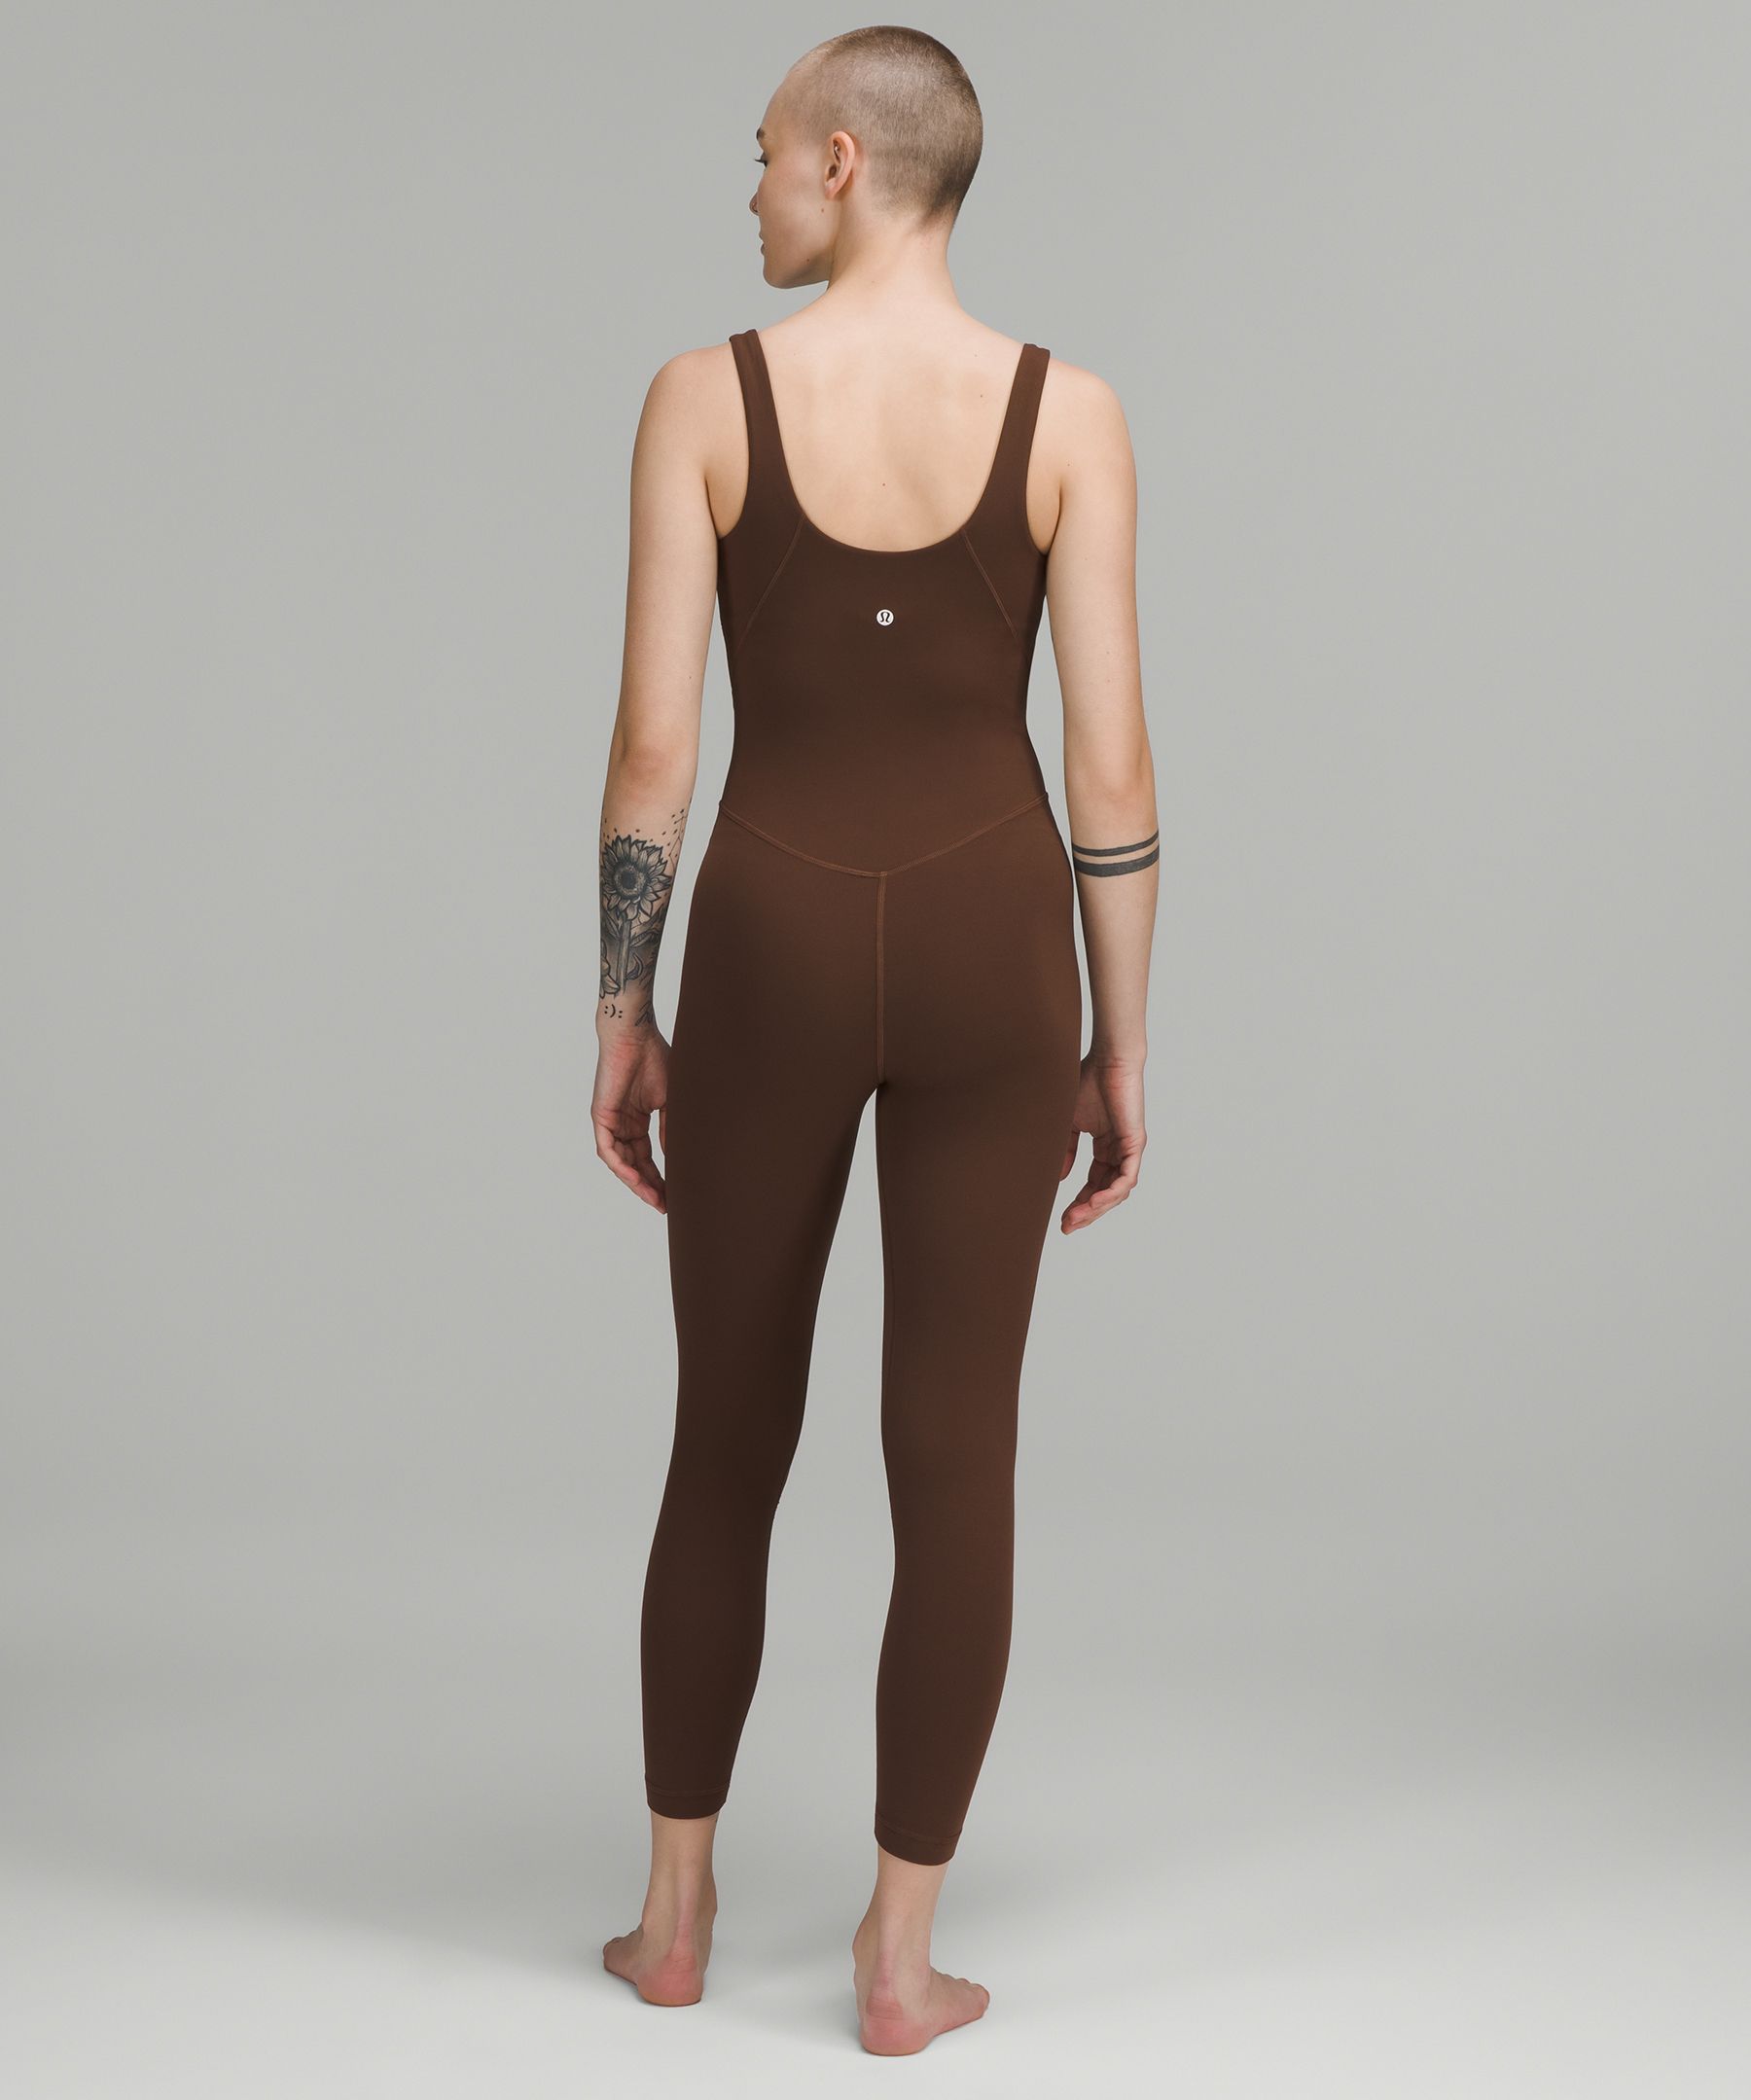 Align 8” Onesie size 4 black. Got this on sale for $89 in store